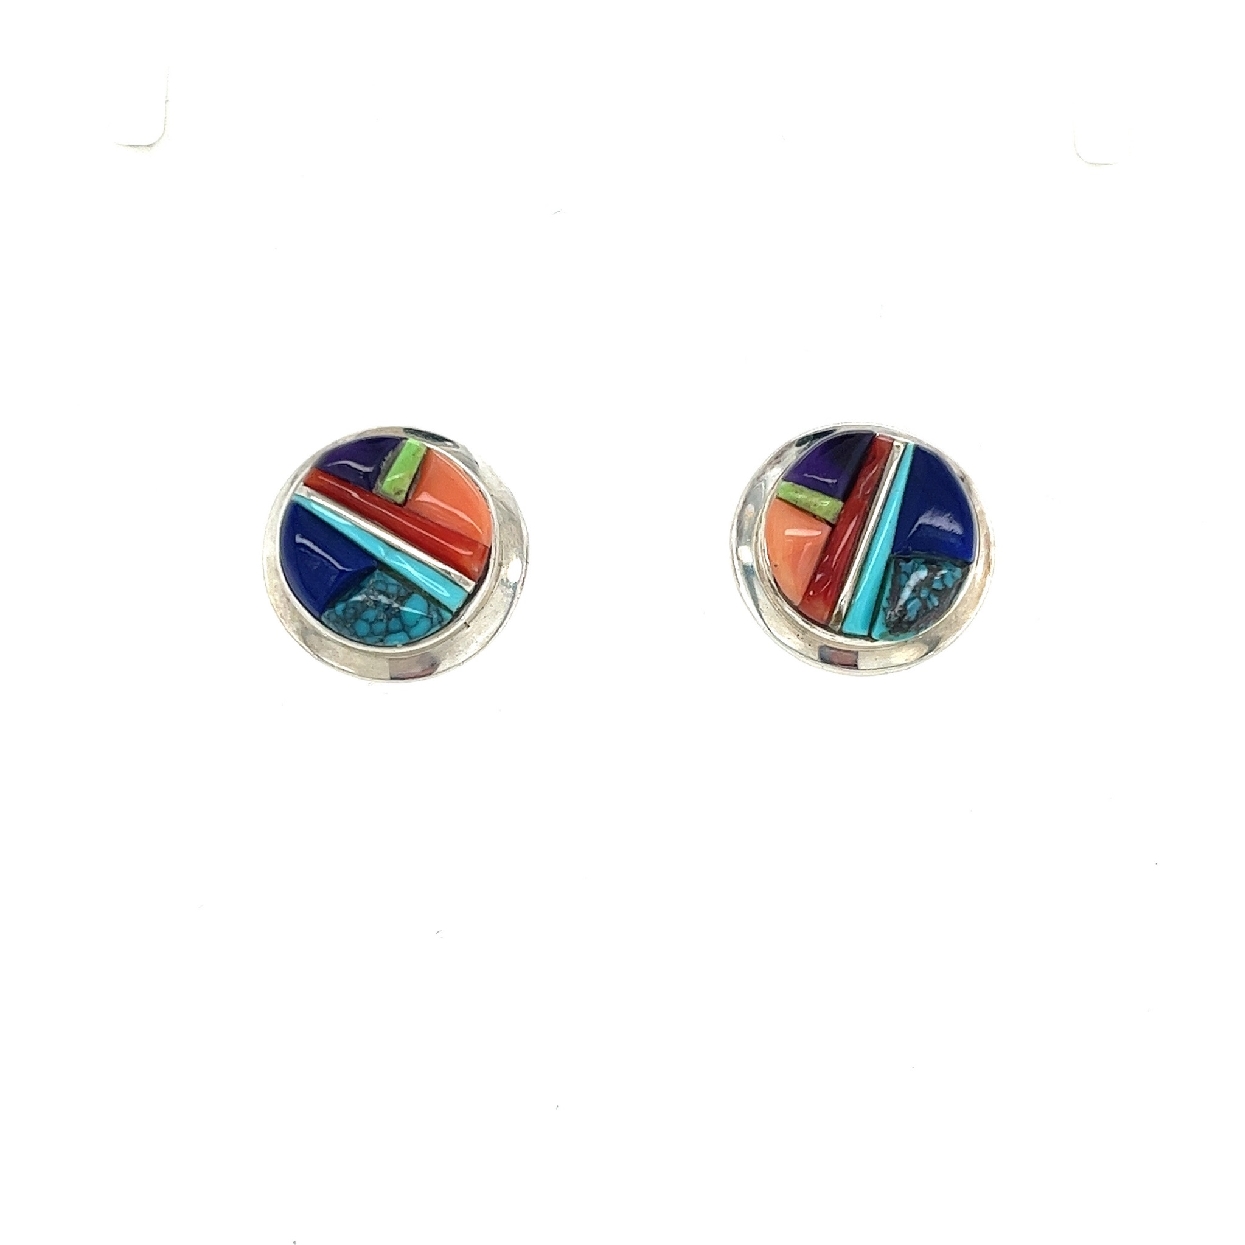 Sterling Silver Signed David Rosales Stud Earrings with Multi Stone Moaisc Pattern made up of Sleeping Beauty and Tibetan Turquoise; Angelskin and Mediteranean Coral; Gaspeite; and Sugilite 